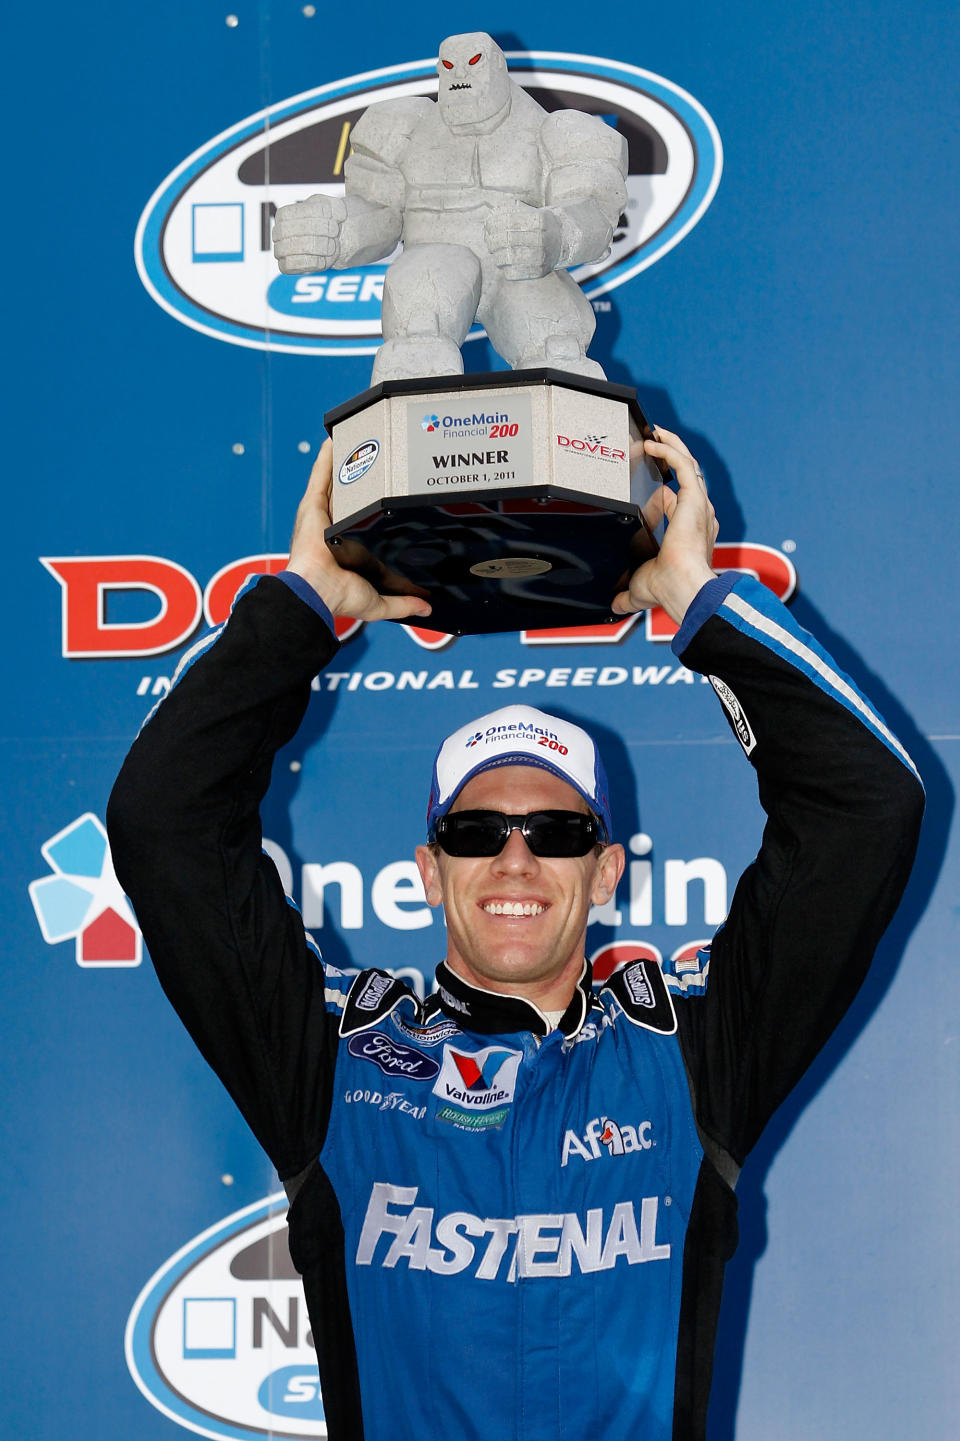 DOVER, DE - OCTOBER 01: Carl Edwards, driver of the #60 Fastenal Ford, celebrates with the trophy in victory lane after he won the NASCAR Nationwide Series OneMain Financial 200 at Dover International Speedway on October 1, 2011 in Dover, Delaware. (Photo by Todd Warshaw/Getty Images for NASCAR)